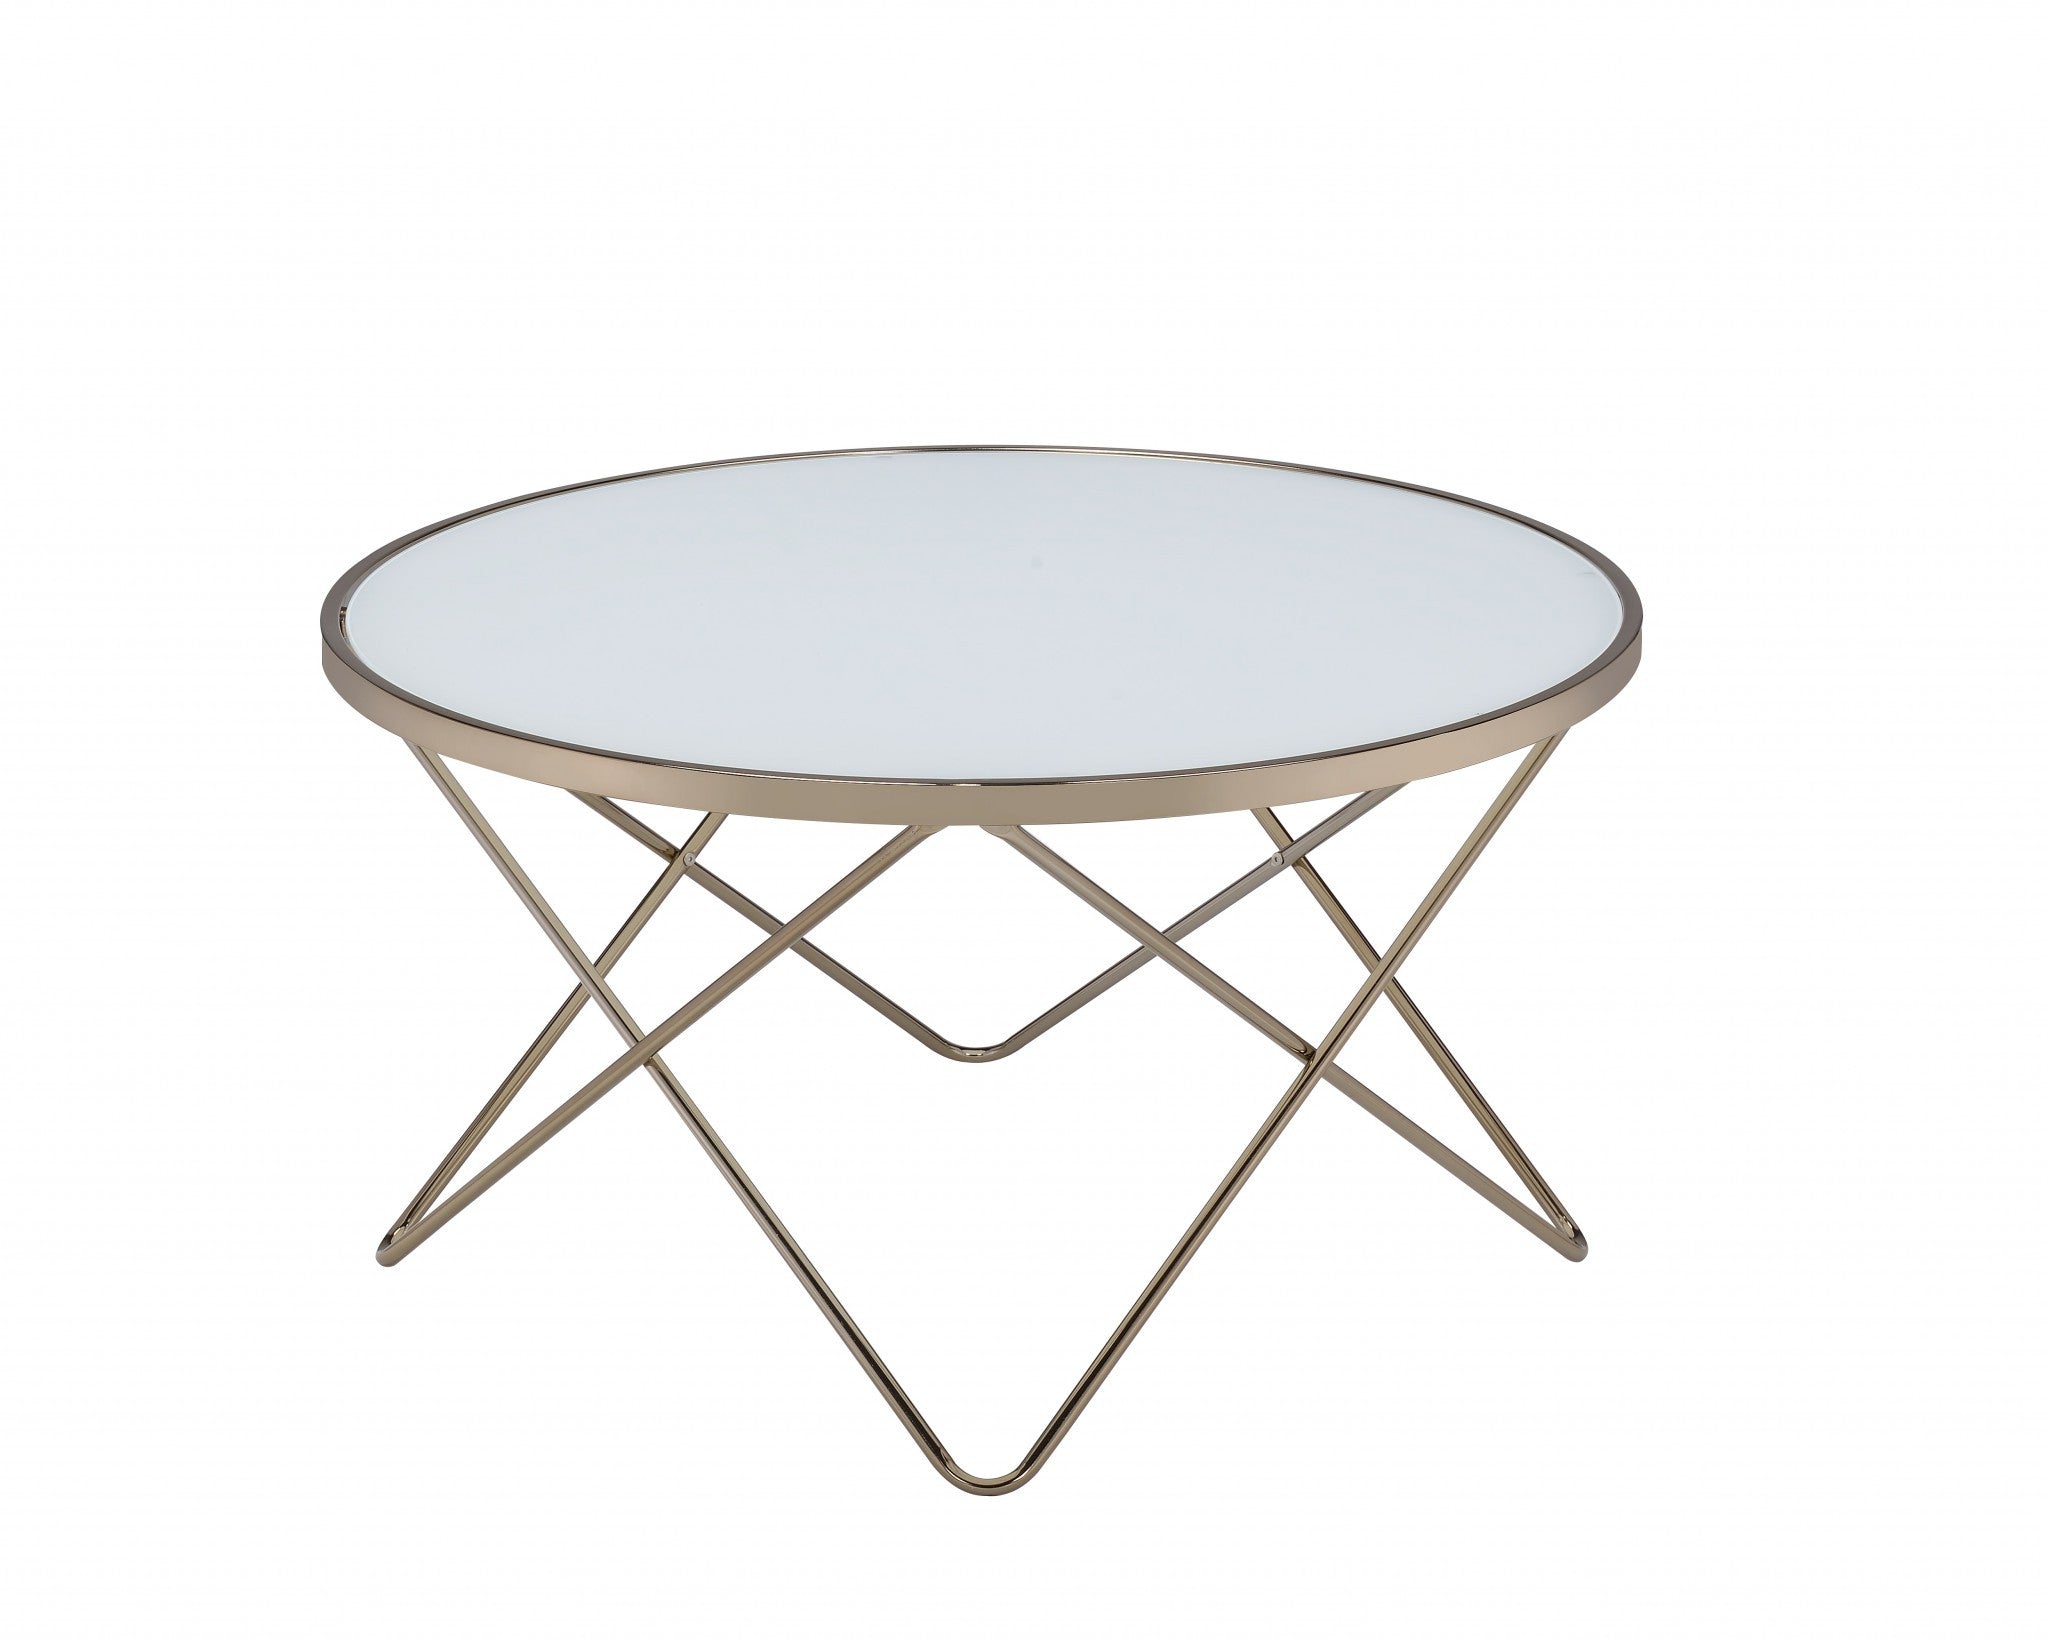 34" X 34" X 18" Frosted Glass Champagne Coffee Table